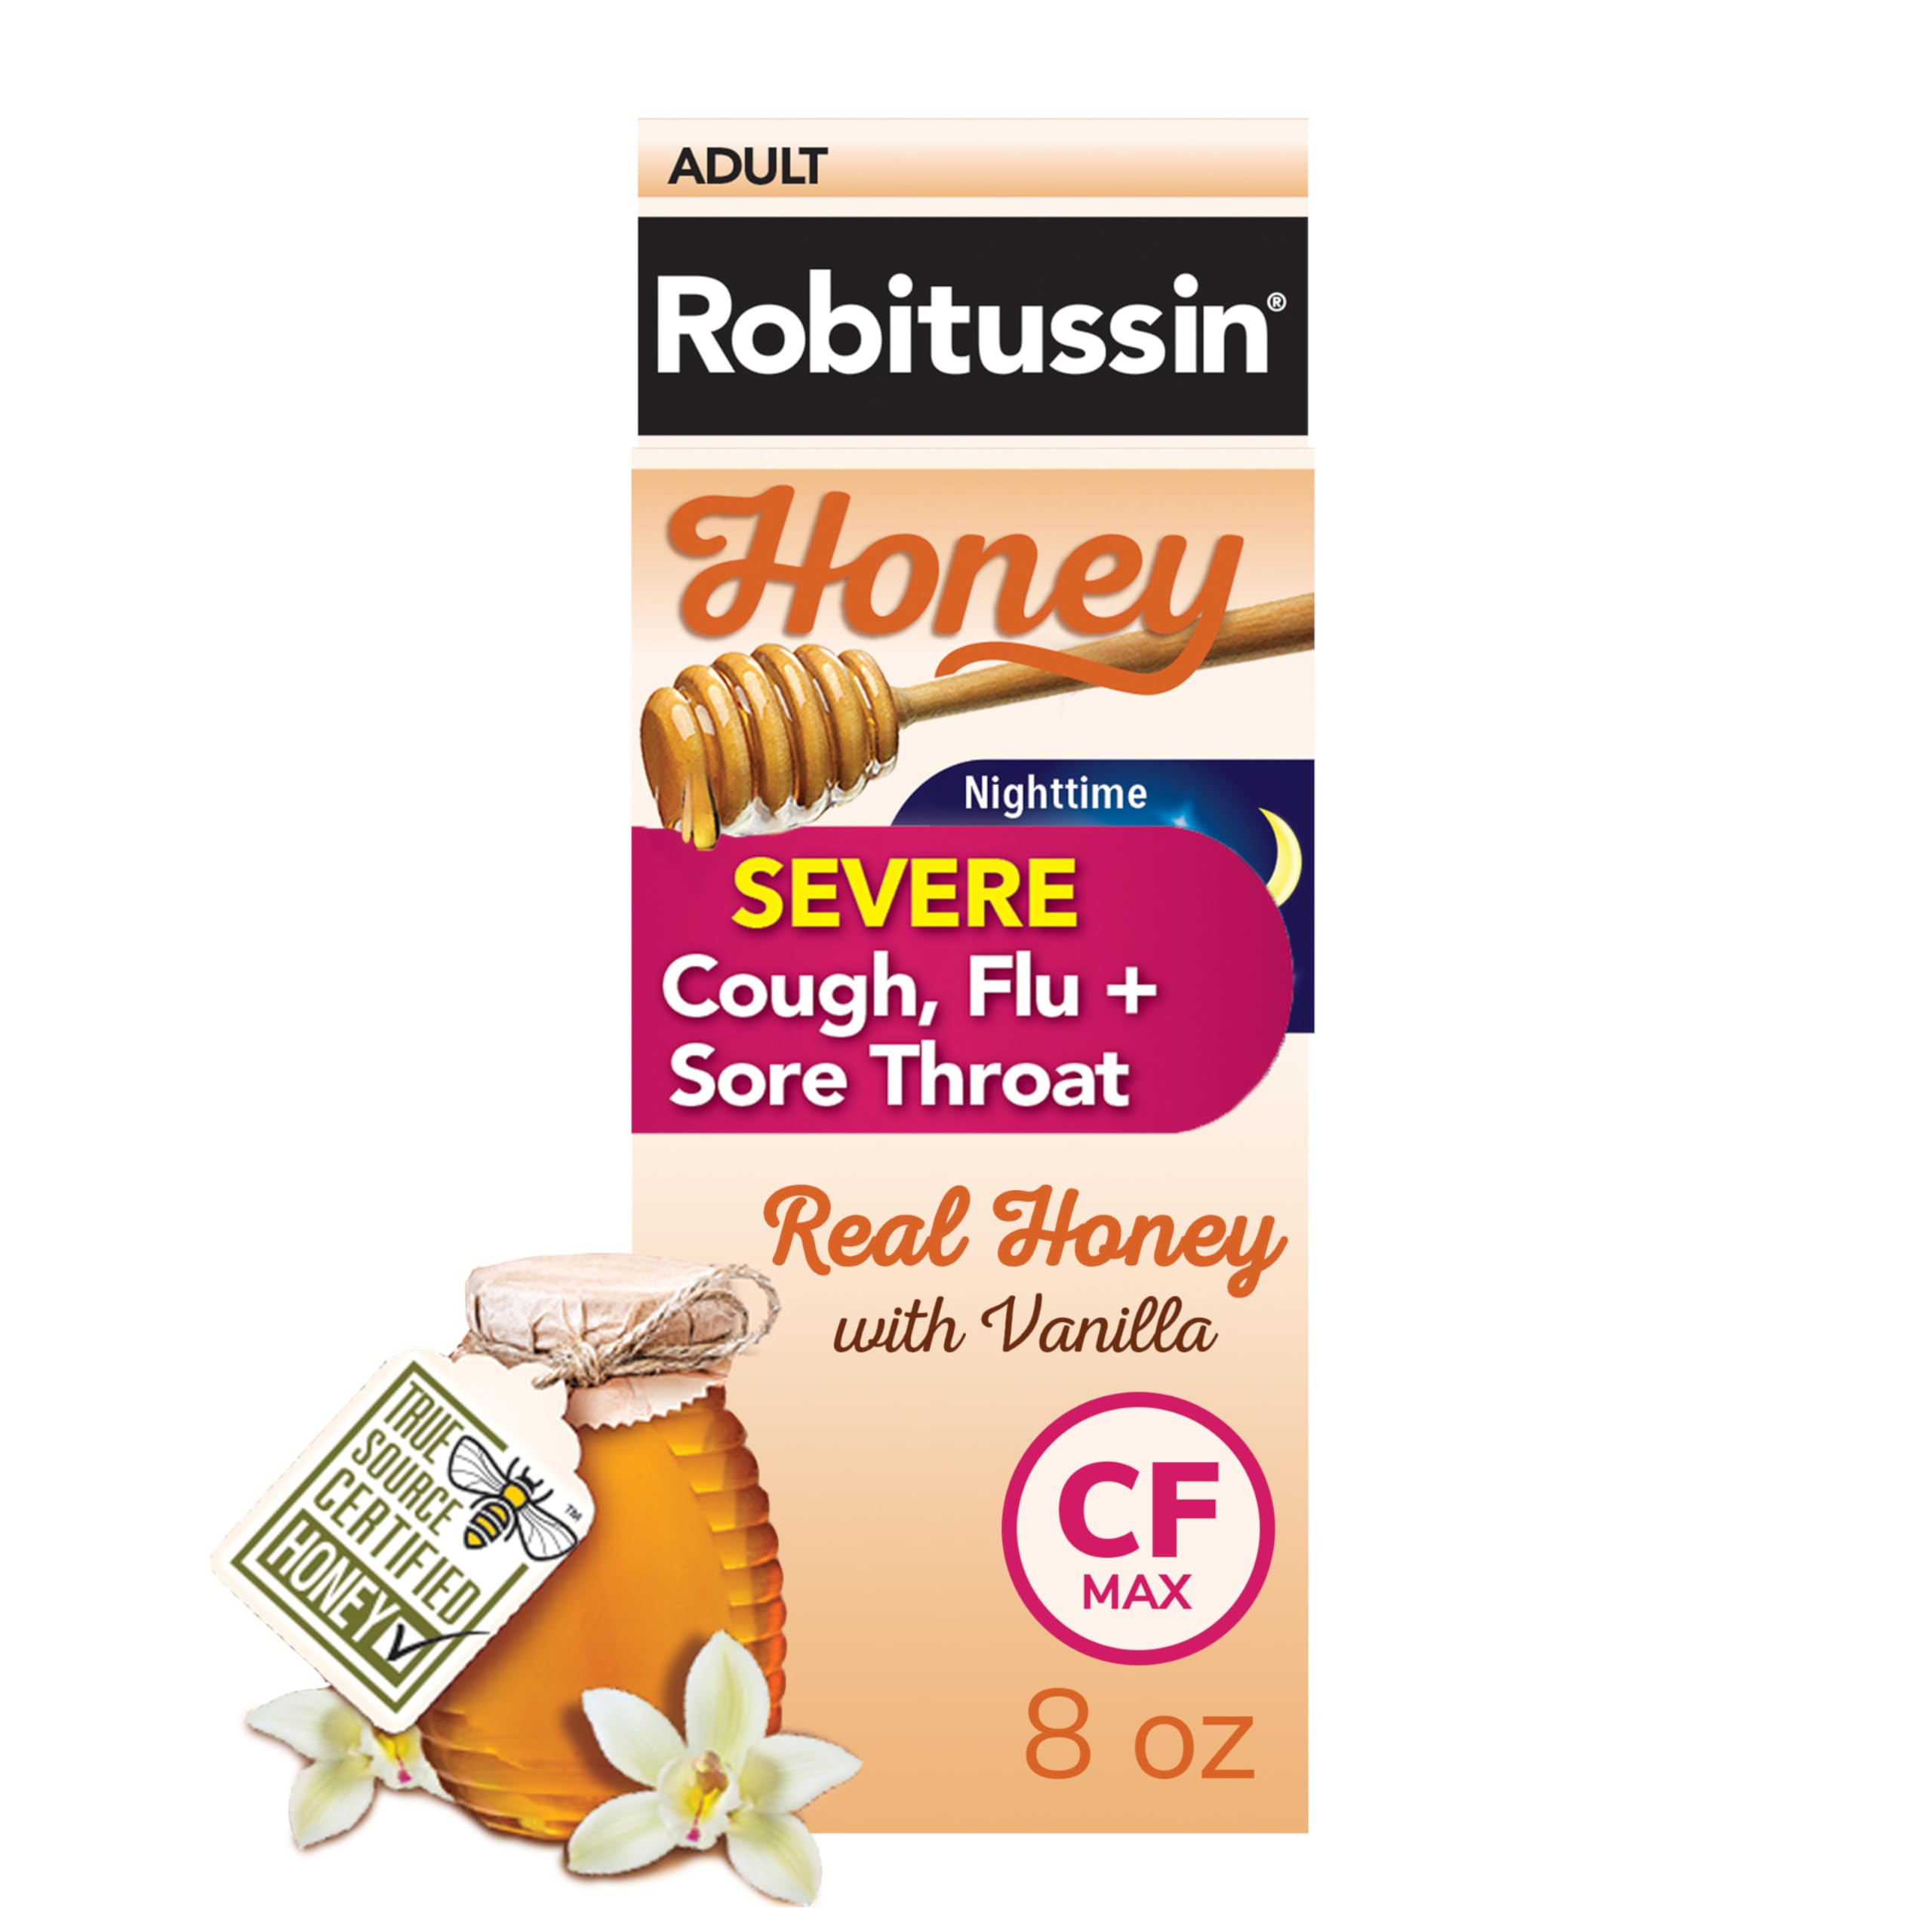 8oz Robitussin Honey Severe Cough, Flu & Sore Throat Nighttime Max Syrup 2 for $14.85 w/ Subscribe & Save